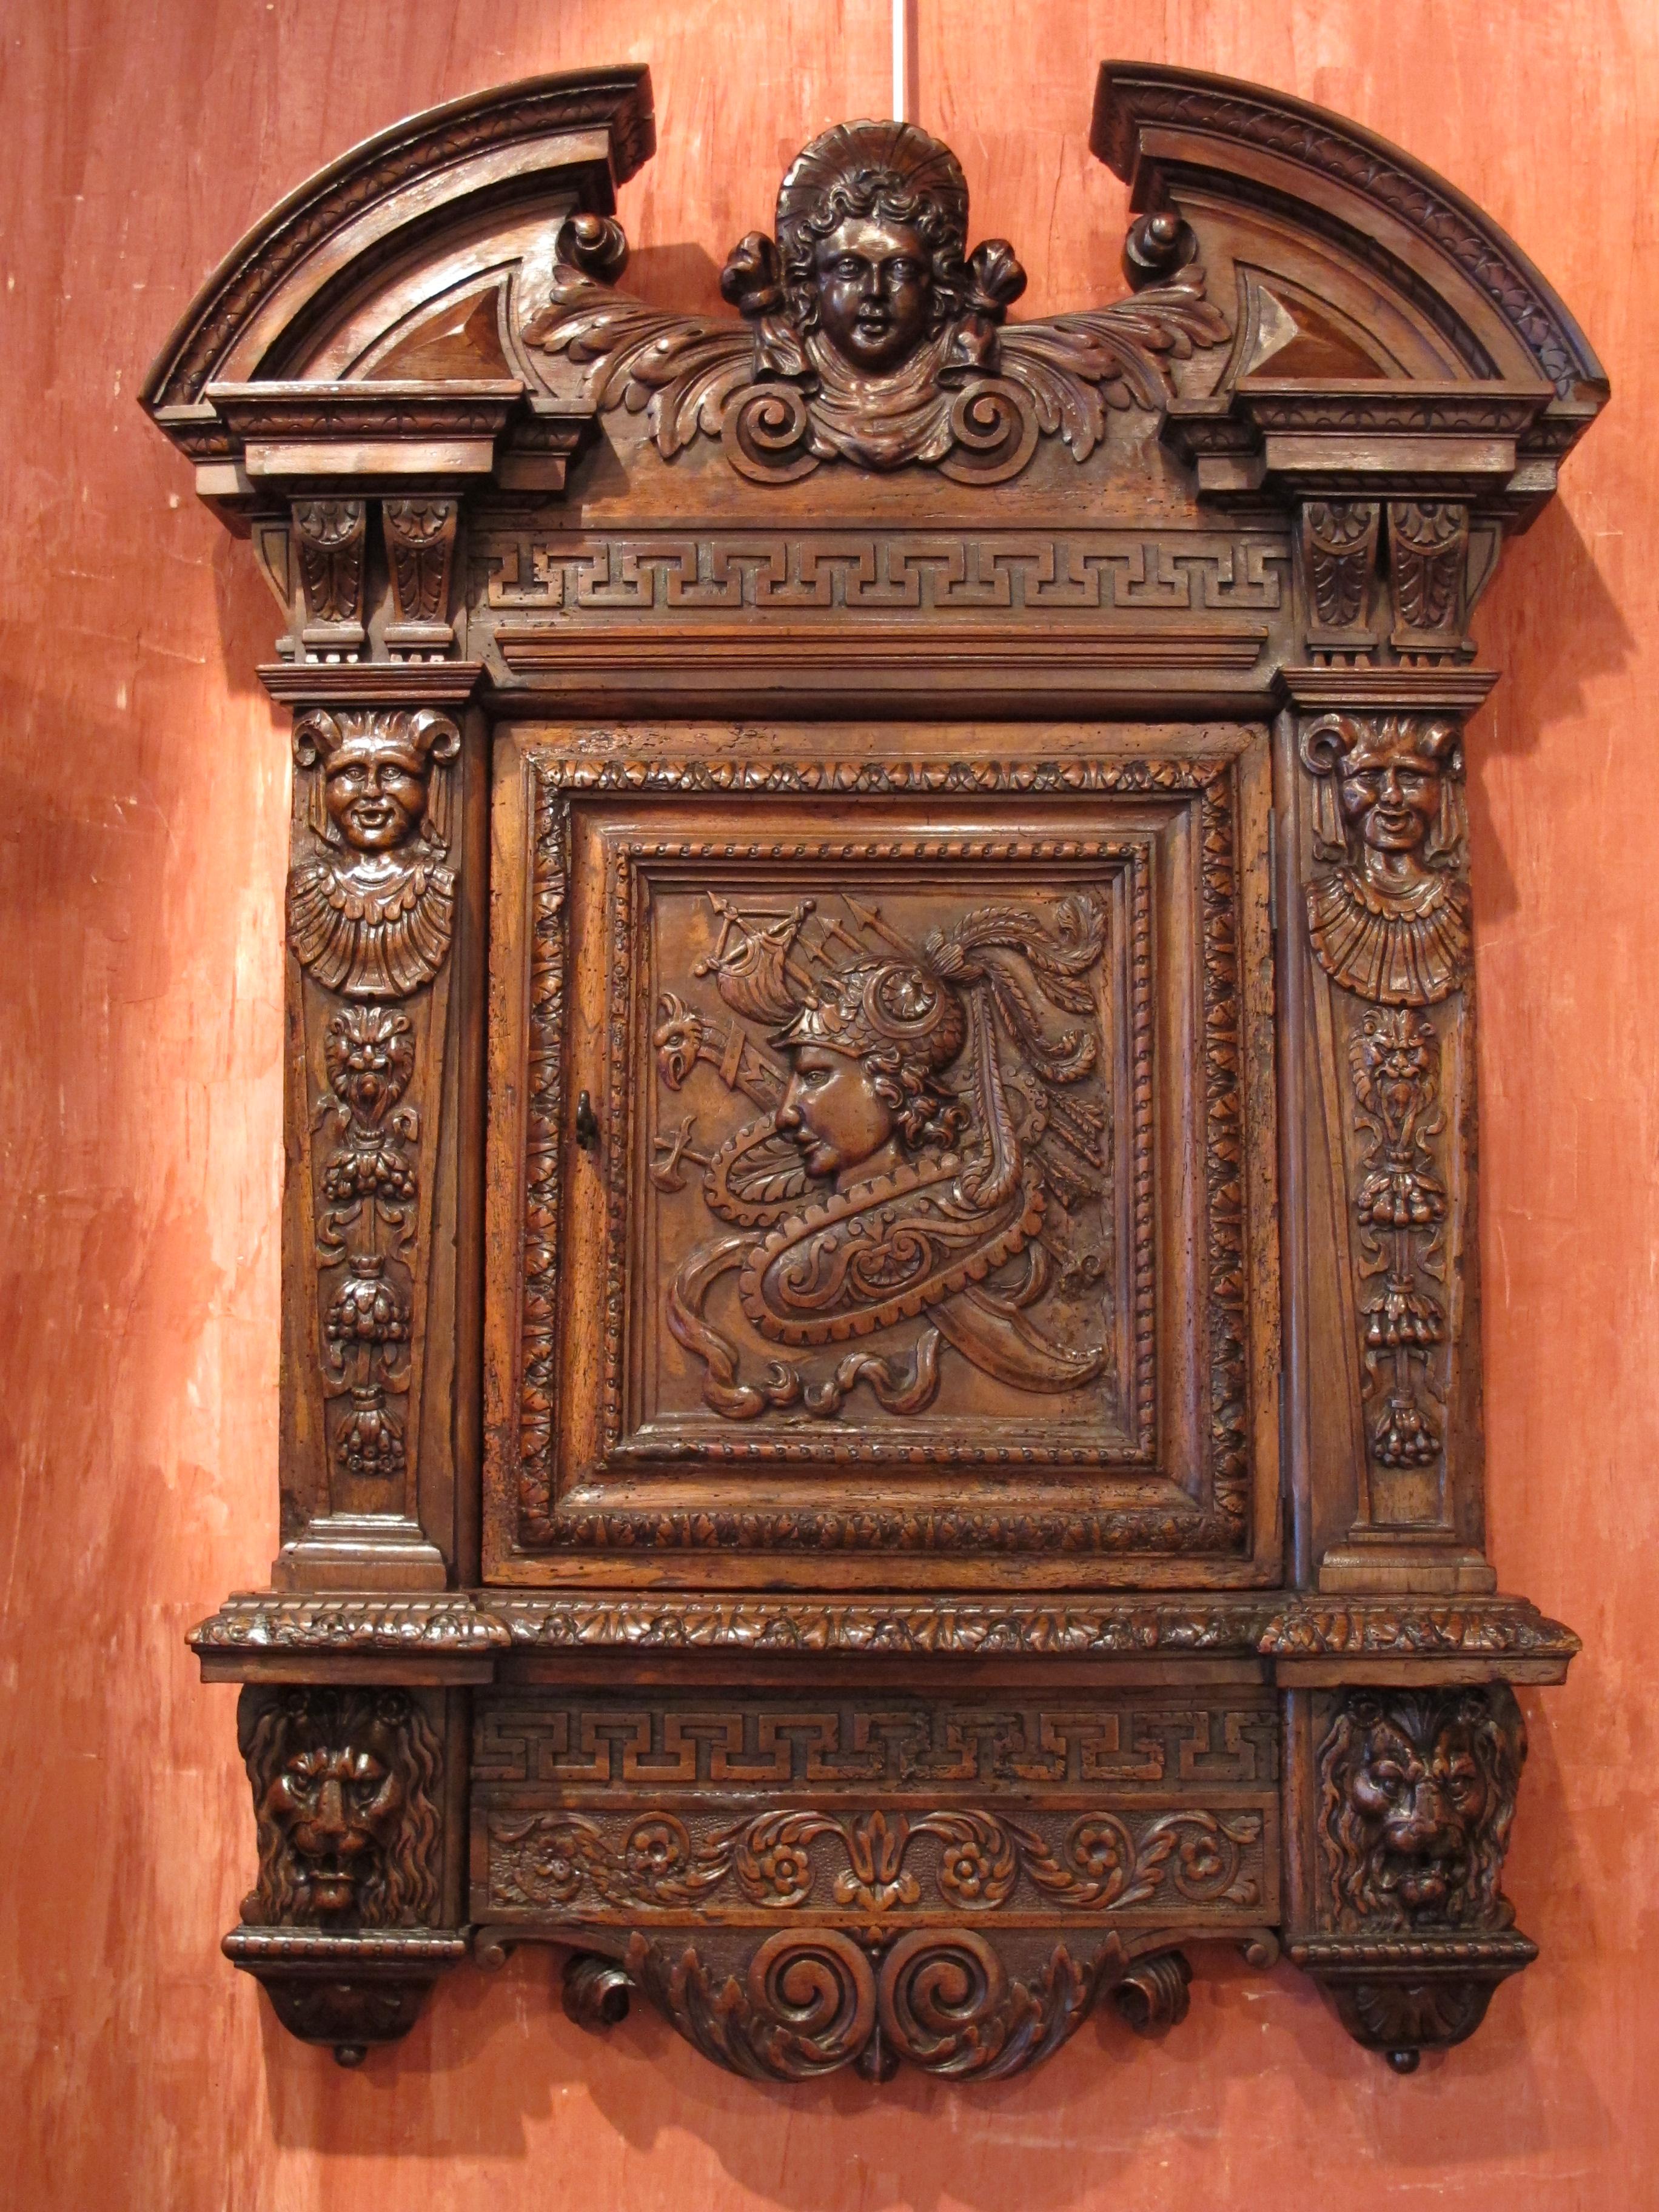 Origine: France
Epoque : 16th century

Measures: Height 90 cm
Length 65 cm
Depth 10 cm

Walnut

The armoirette has the function to keep small precious items (keys, acts on parchment or paper) or dangerous ones (cartridge).

Once opened